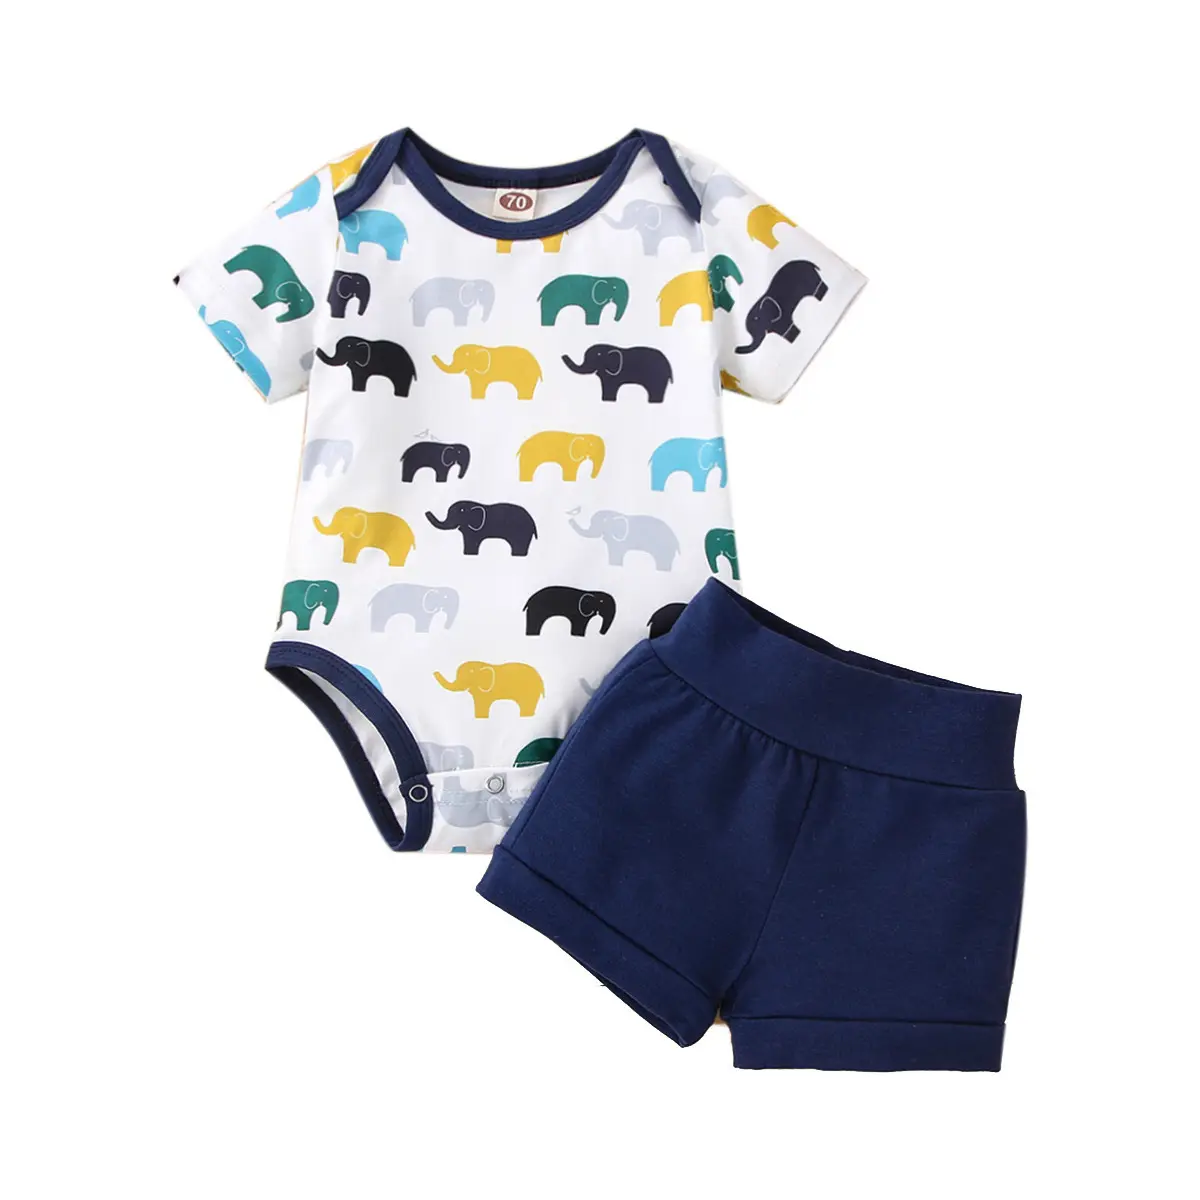 Summer Elephant Baby Infant Girls Boys Clothing Outfit Romper Set for 0-24m Newborn Toddlers Children